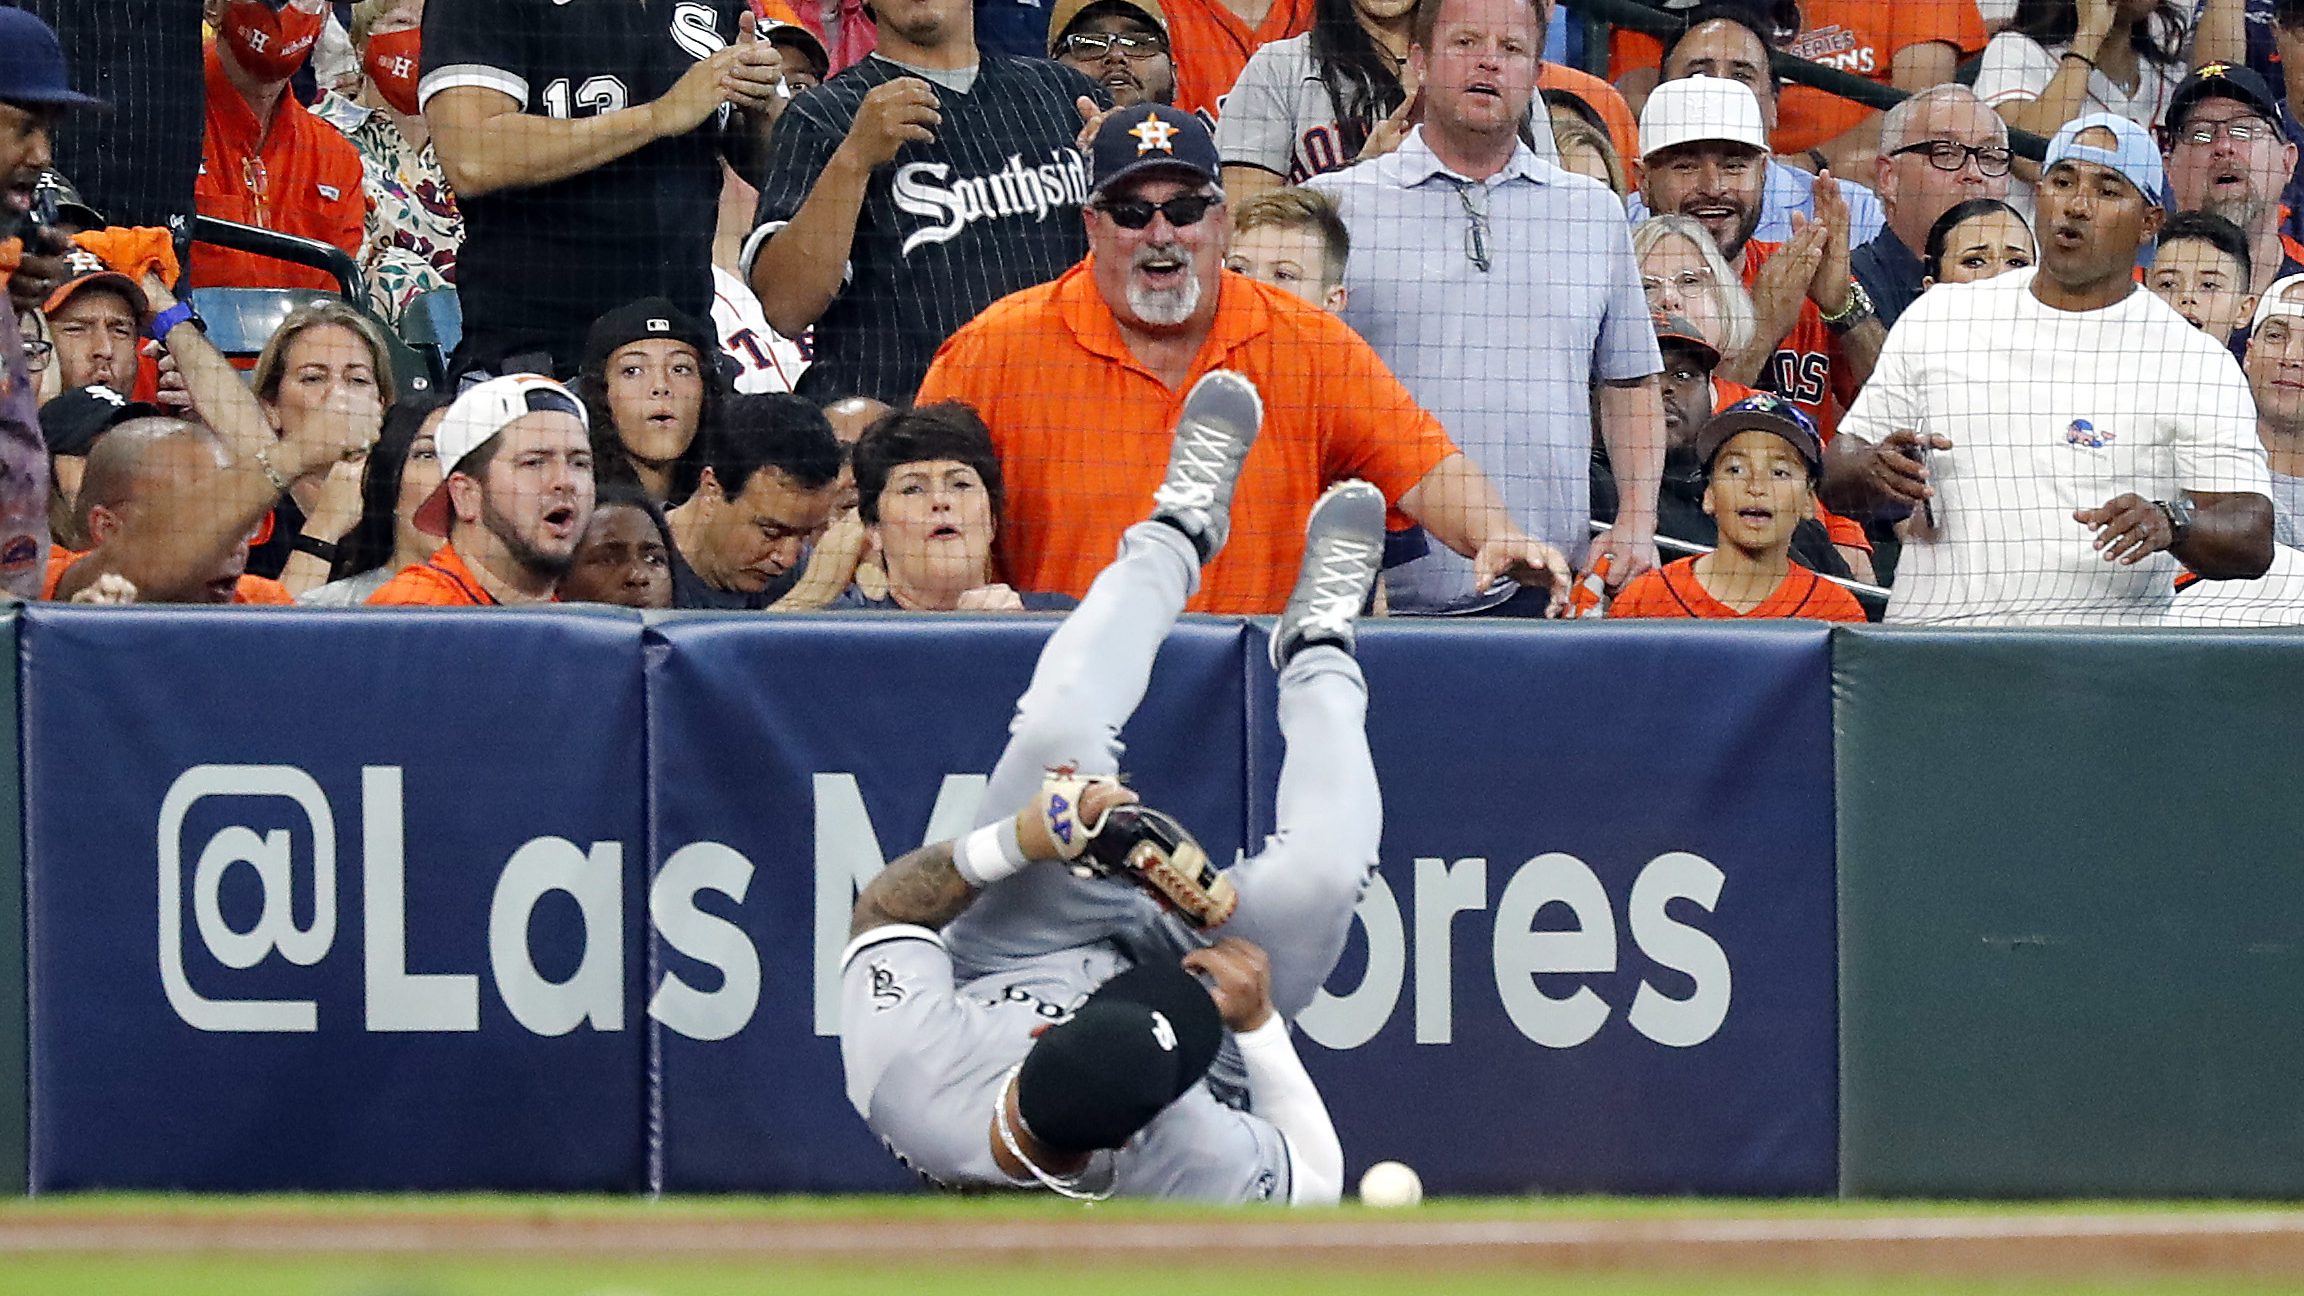 Yoan Moncada of the Chicago White Sox sprawled on the ground in front of jeering Houston Astros fans